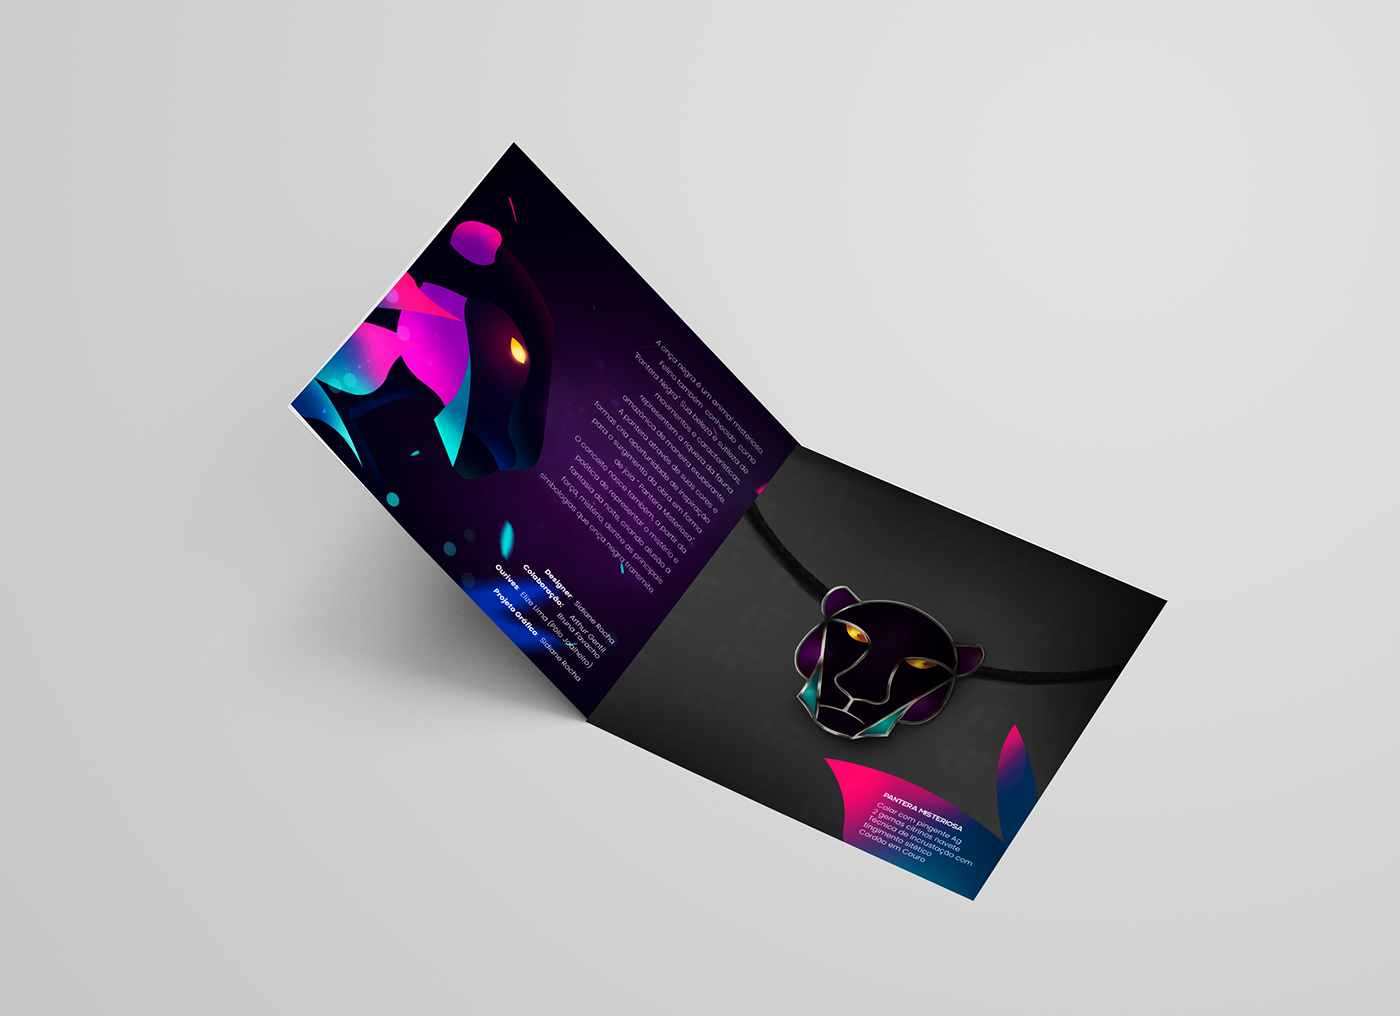 panther black neon Amazon colors night ILLUSTRATION  mistery jewels design